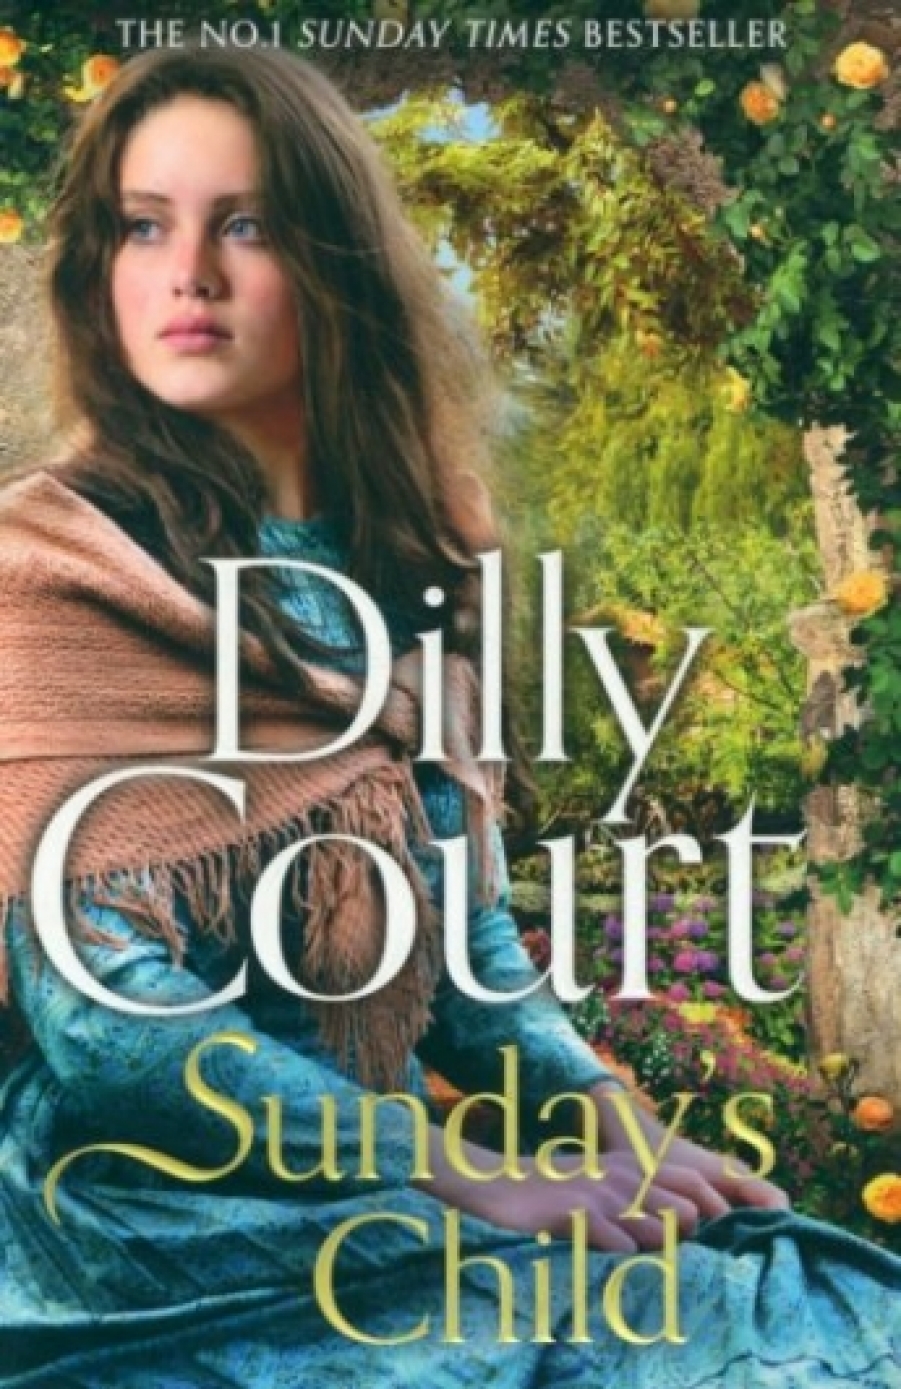 Court Dilly Sunday's Child 